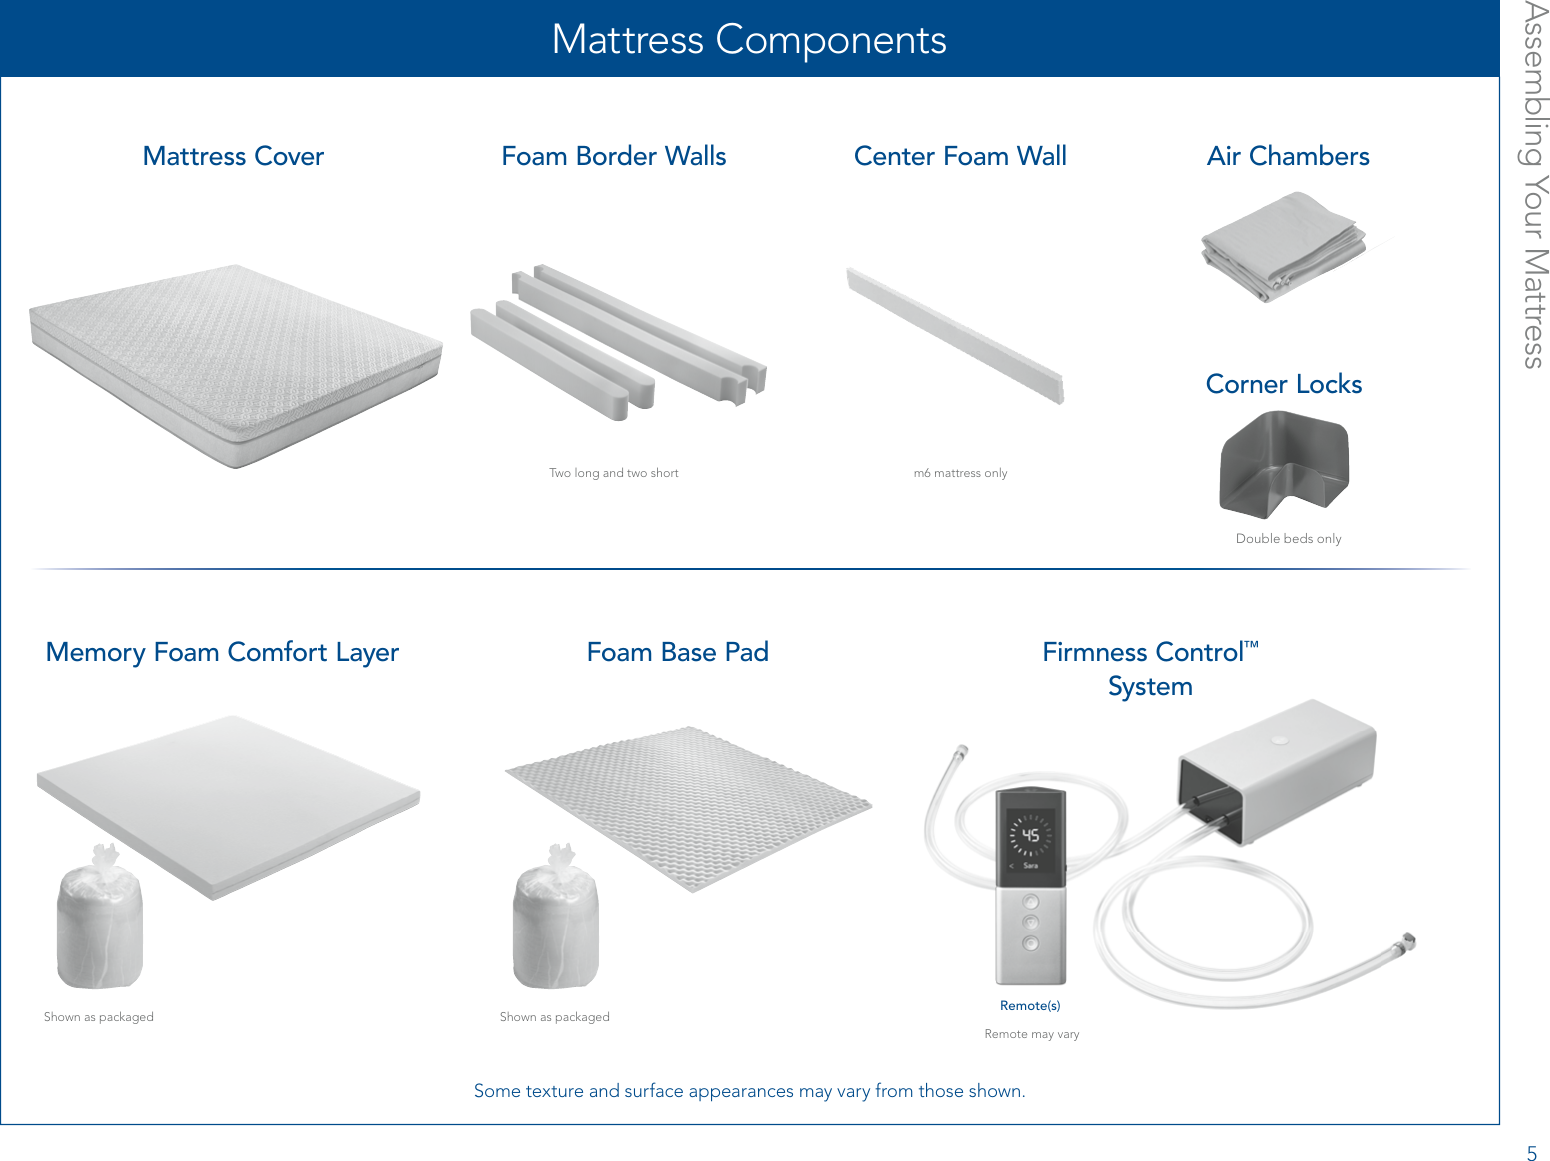 Assembling Your MattressSome texture and surface appearances may vary from those shown.Mattress Components  Mattress CoverFoam Base PadFoam Border Walls Center Foam WallTwo long and two short m6 mattress onlyMemory Foam Comfort LayerAir ChambersShown as packaged Shown as packagedDouble beds onlyCorner LocksRemote may varyRemote(s)Firmness Control™ System5